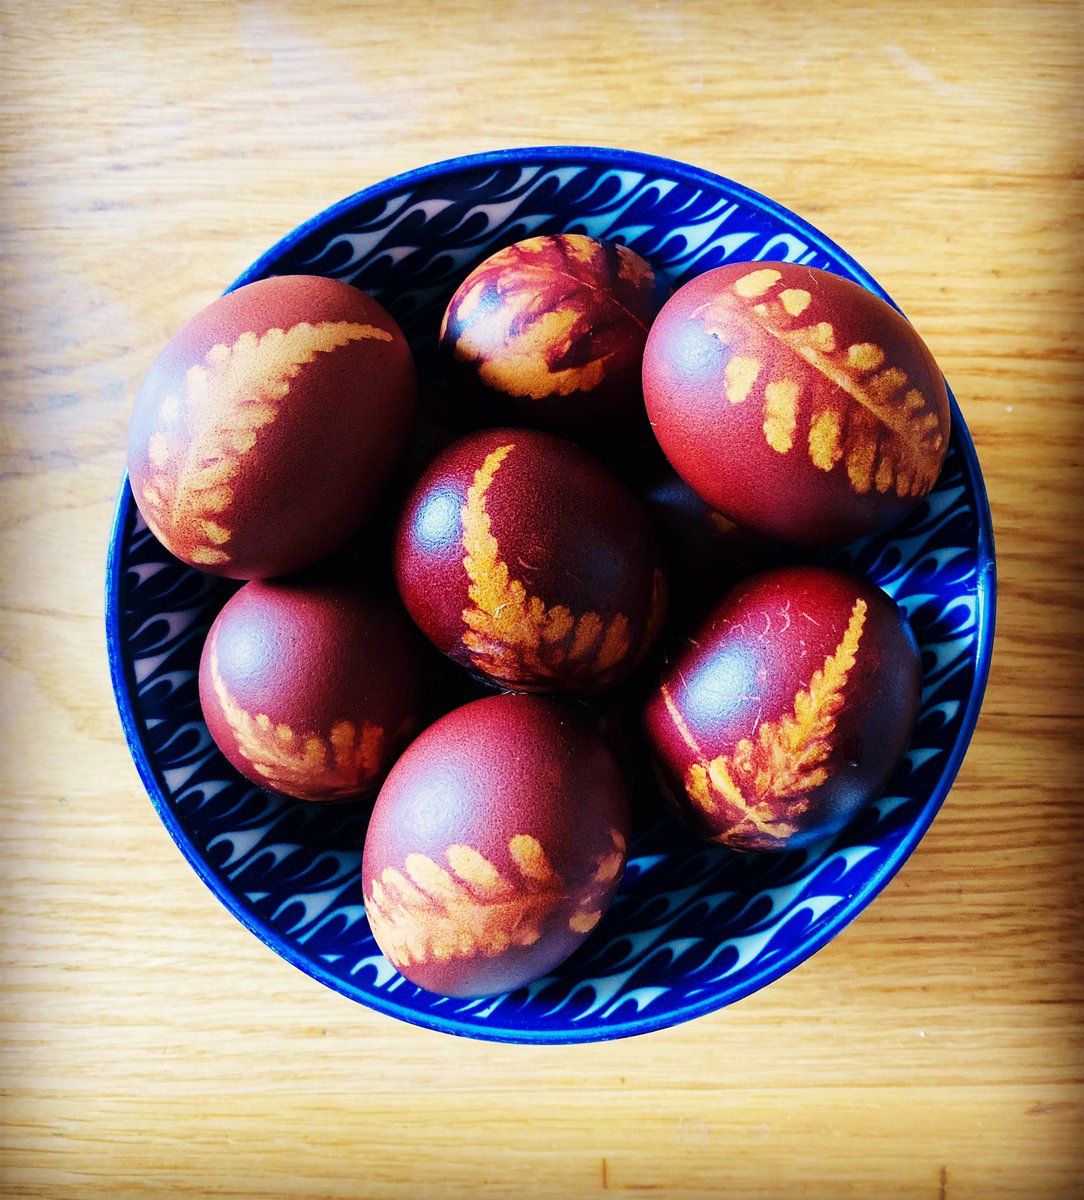 ☀️ A very happy Easter and bank holiday weekend to you all from CWAAS. These will be in many Cumbrian households this weekend ☀️ #Easter #HappyEaster #eggs #pascheegg #paceegg